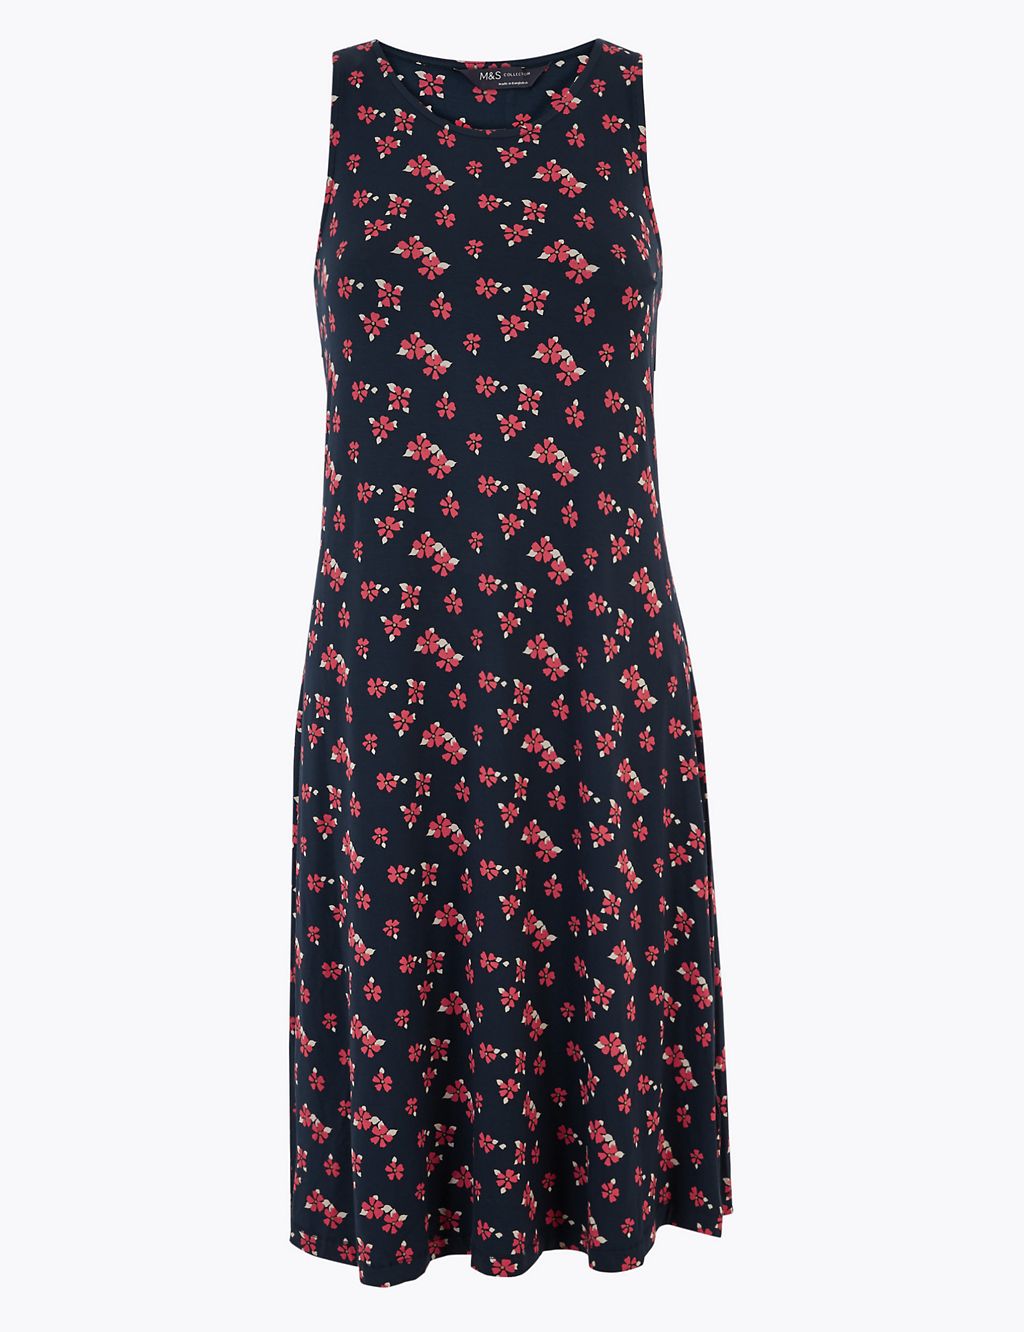 Jersey Floral Knee Length Swing Dress 1 of 4